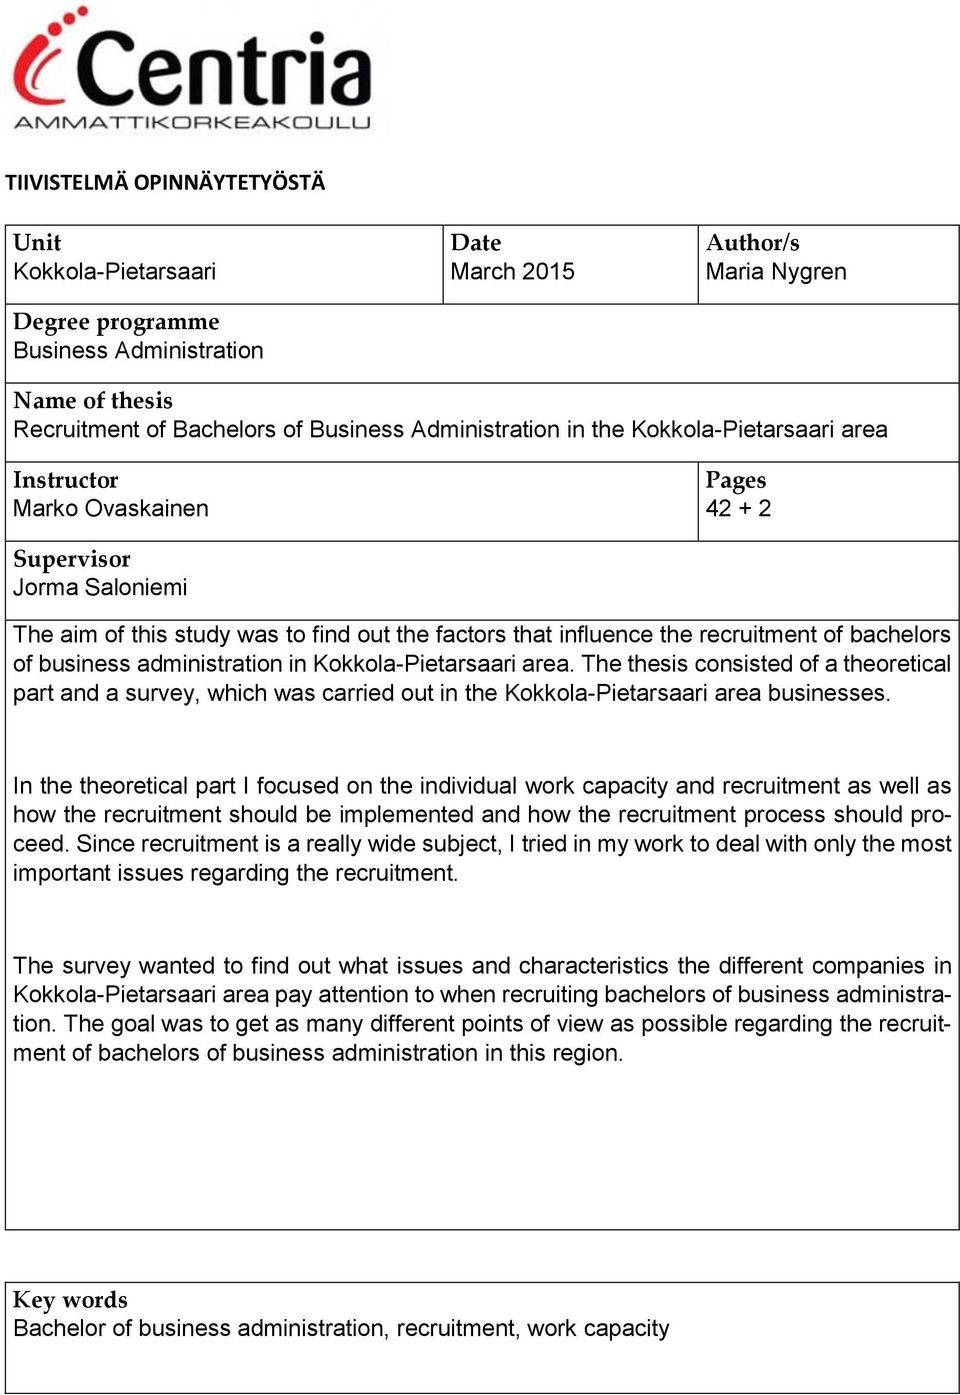 business administration in Kokkola-Pietarsaari area. The thesis consisted of a theoretical part and a survey, which was carried out in the Kokkola-Pietarsaari area businesses.